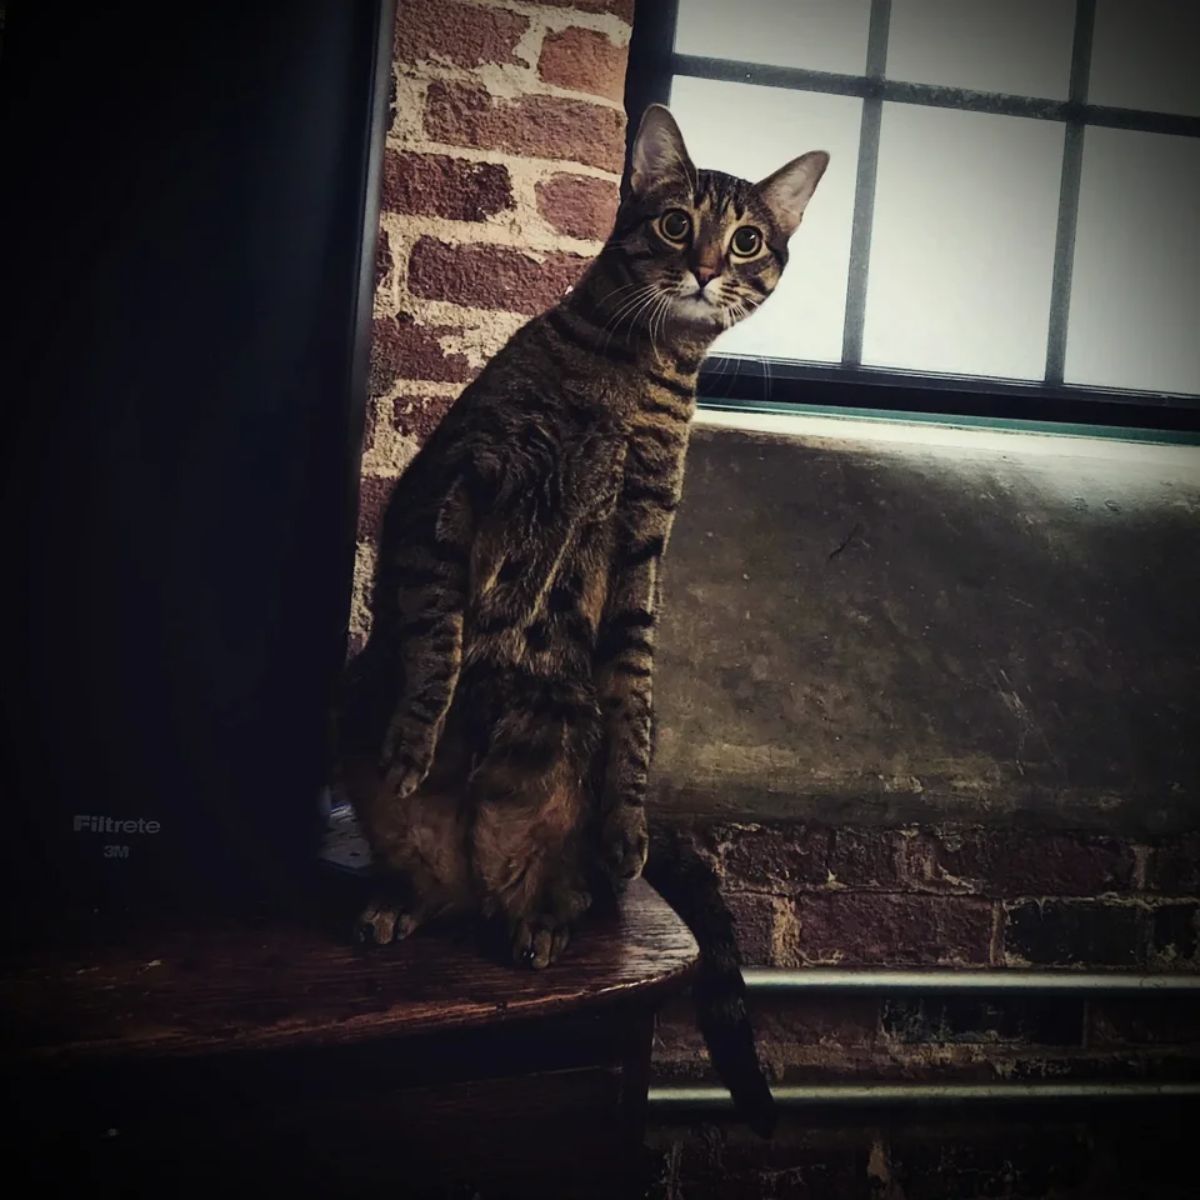 brown tabby cat sitting up on its haunches in curiosity